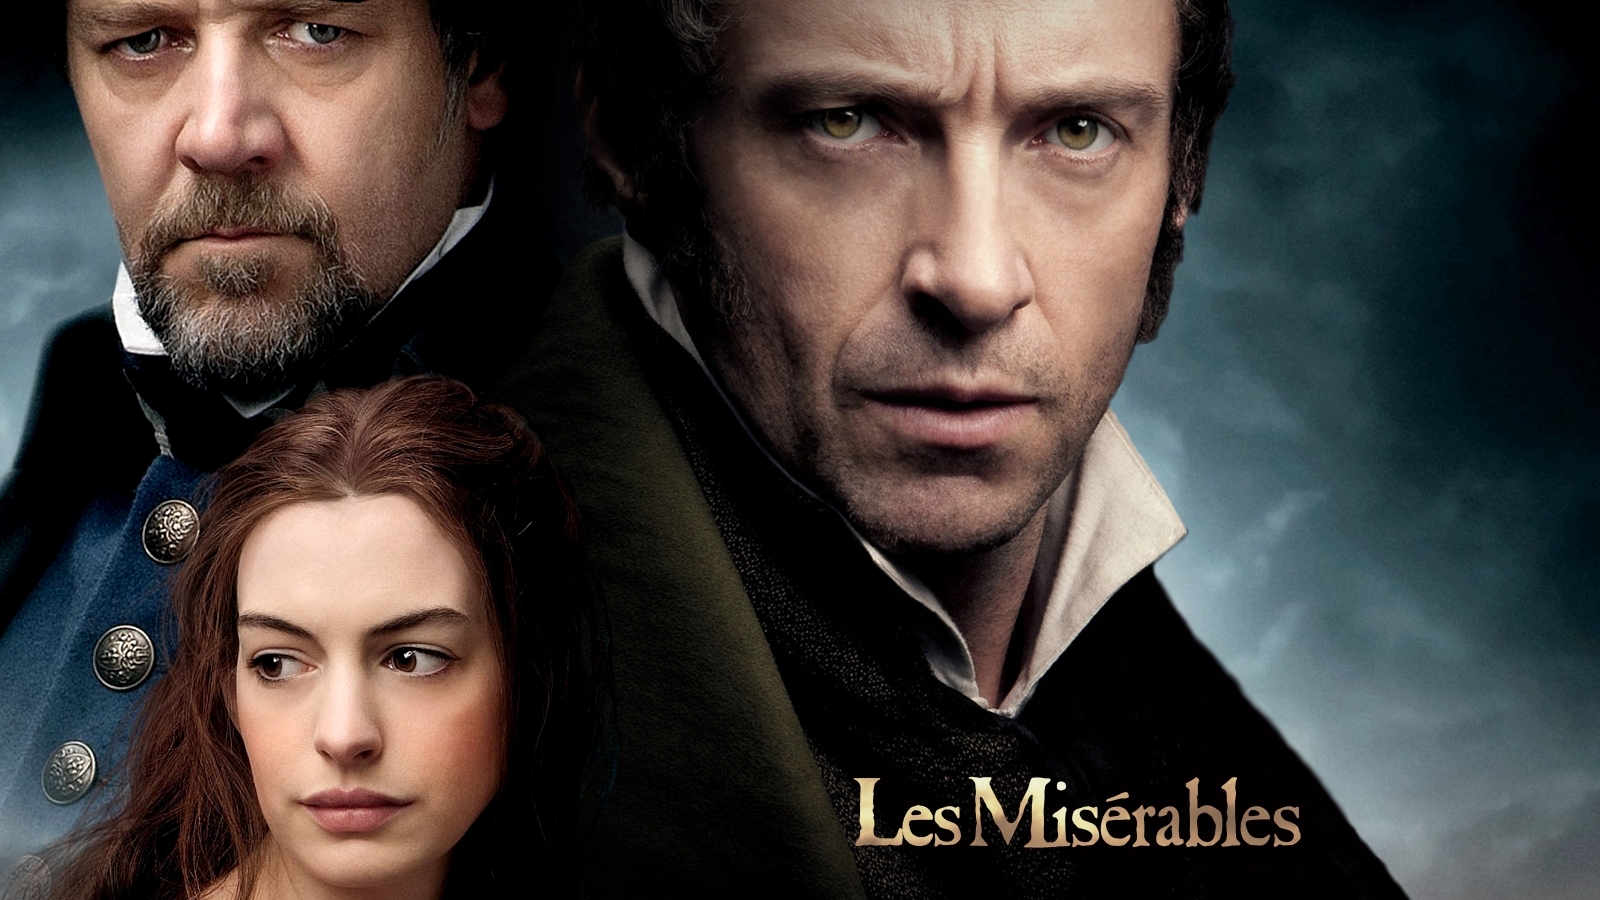 Les miserables hd wallpapers backgrounds